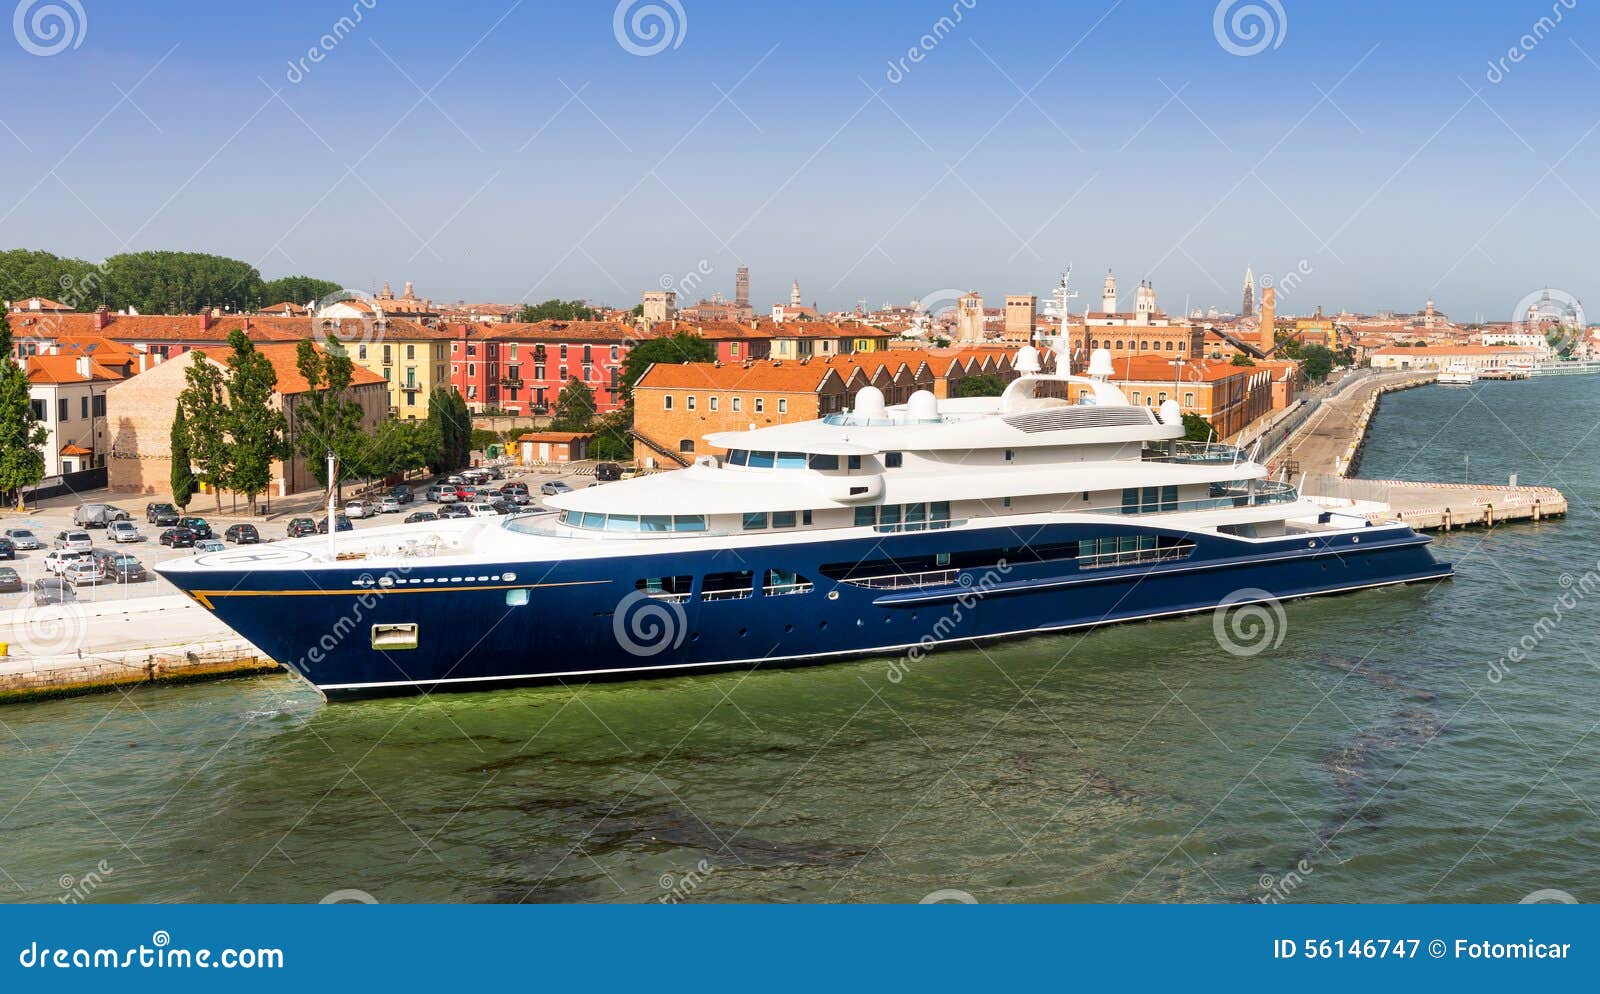 super yachts moored in venice